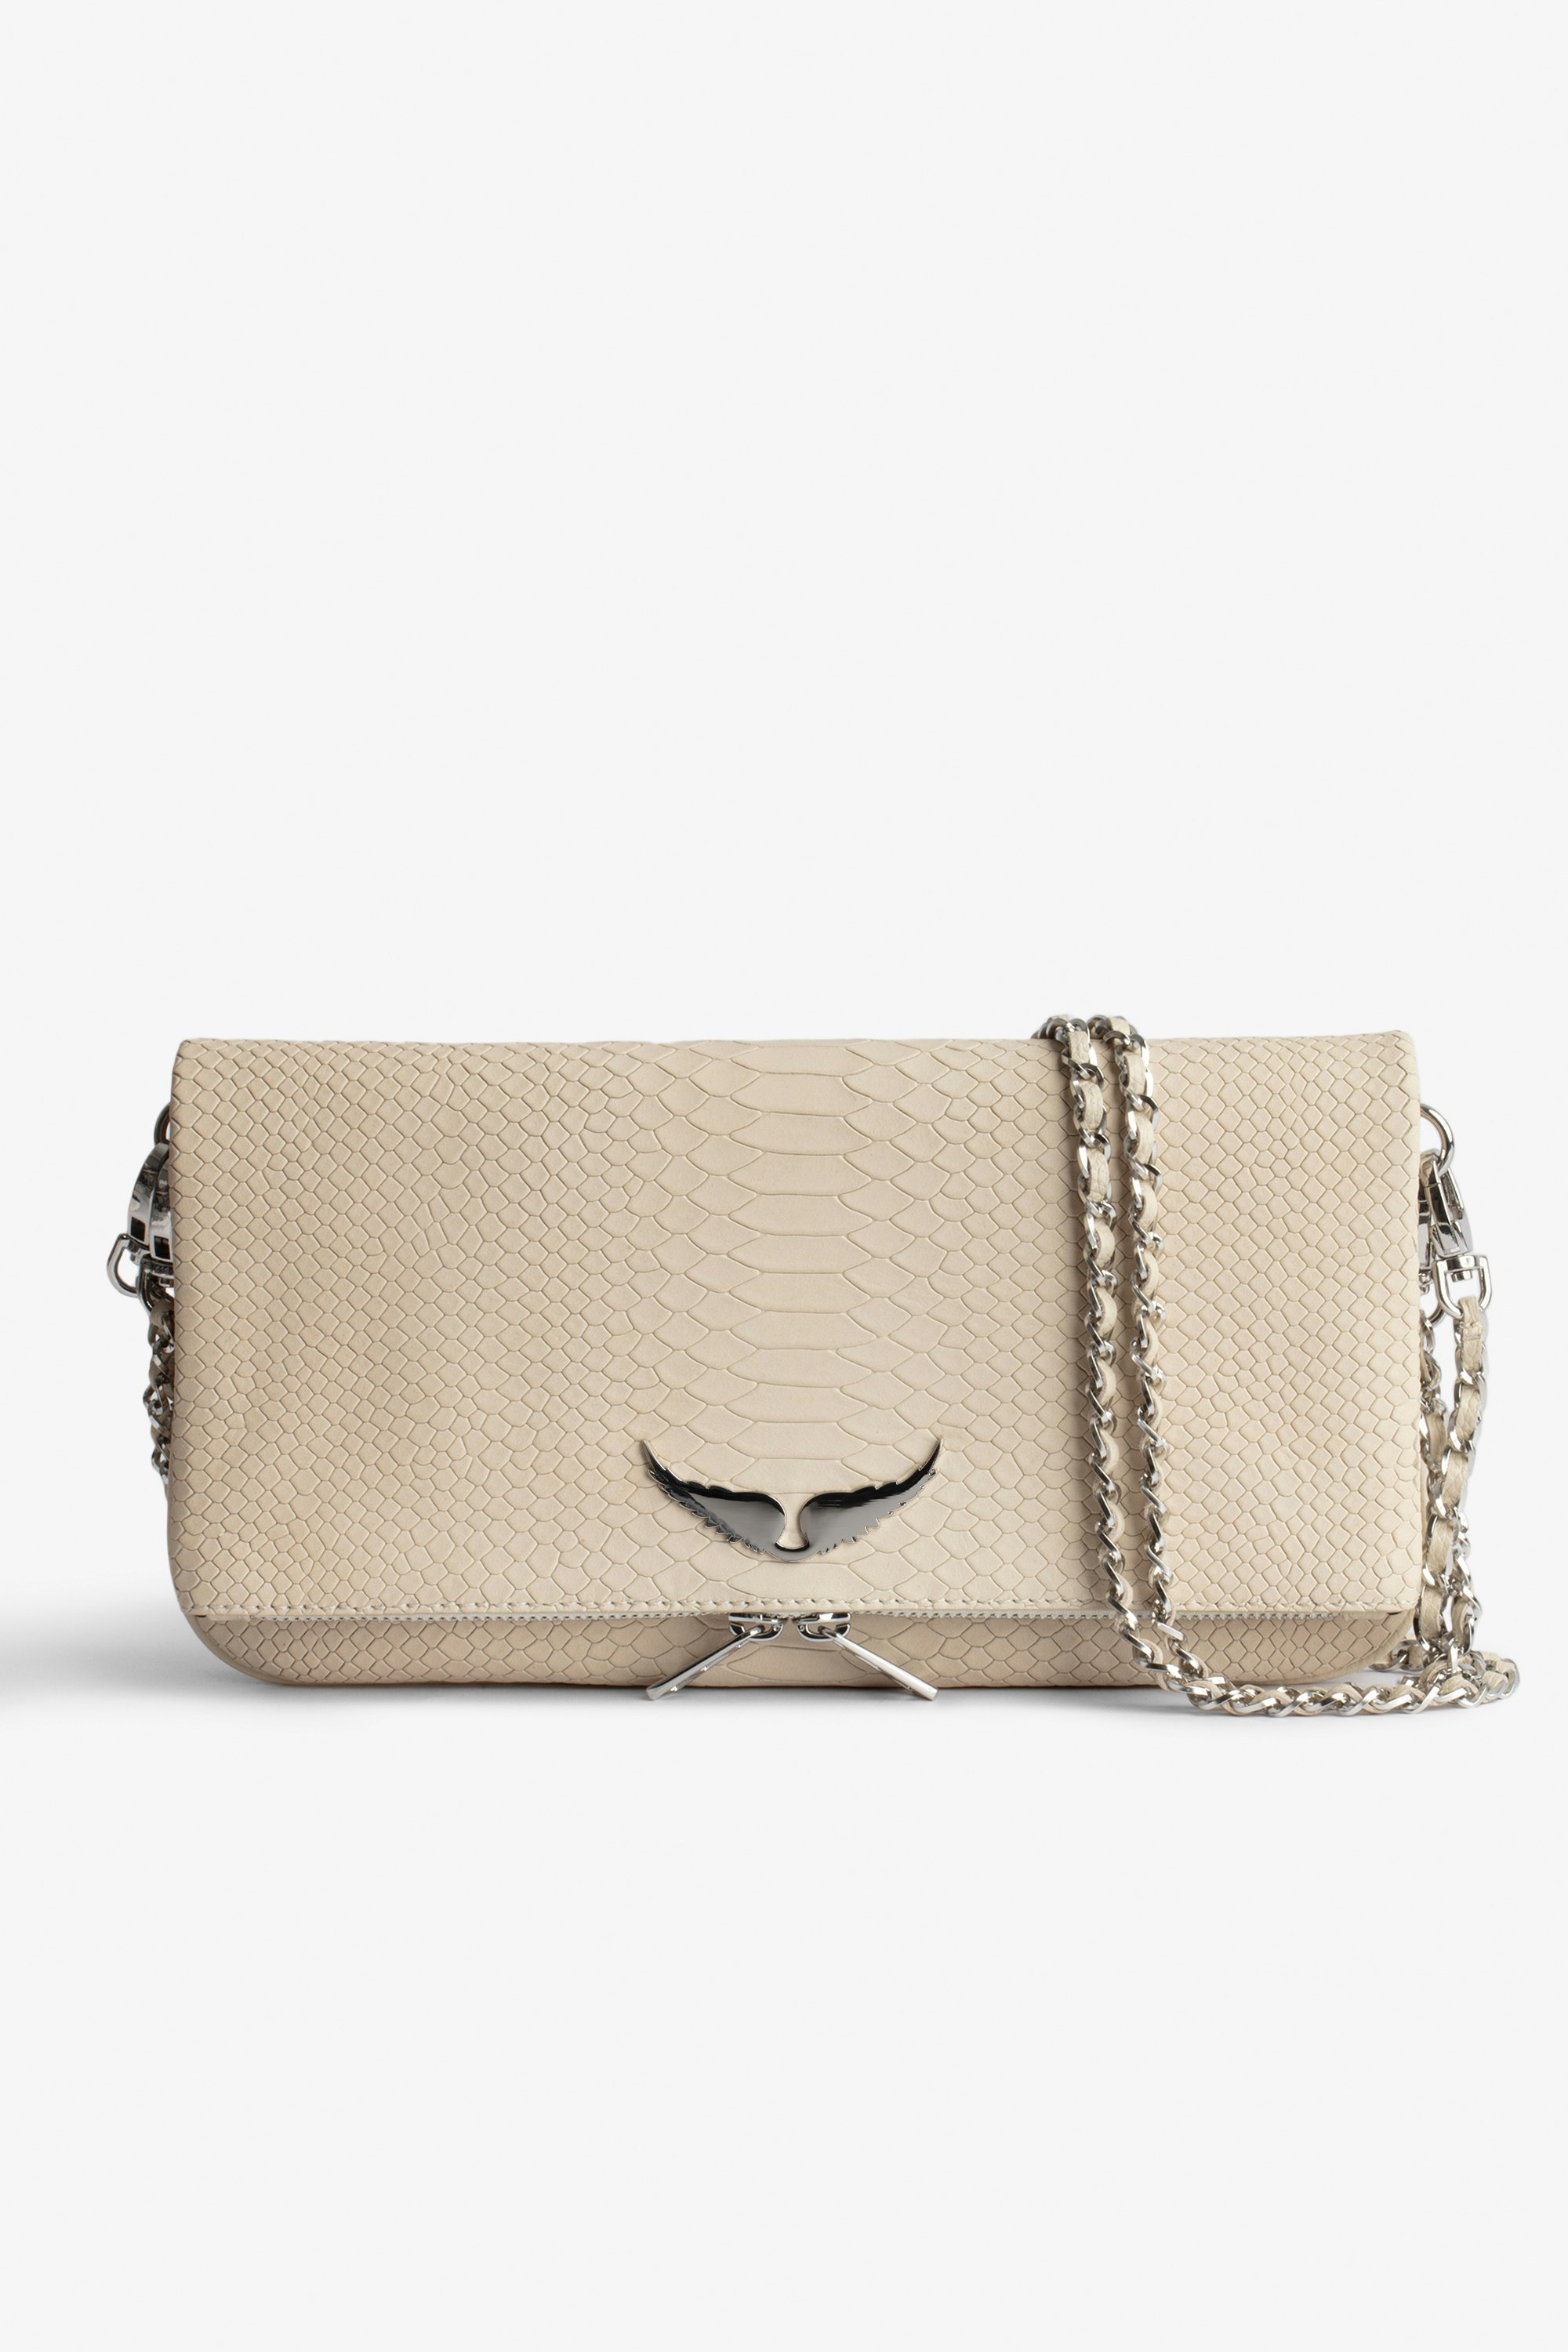 Rock Soft Savage Clutch - Women’s clutch in ecru python-effect leather with double leather-and-metal chain